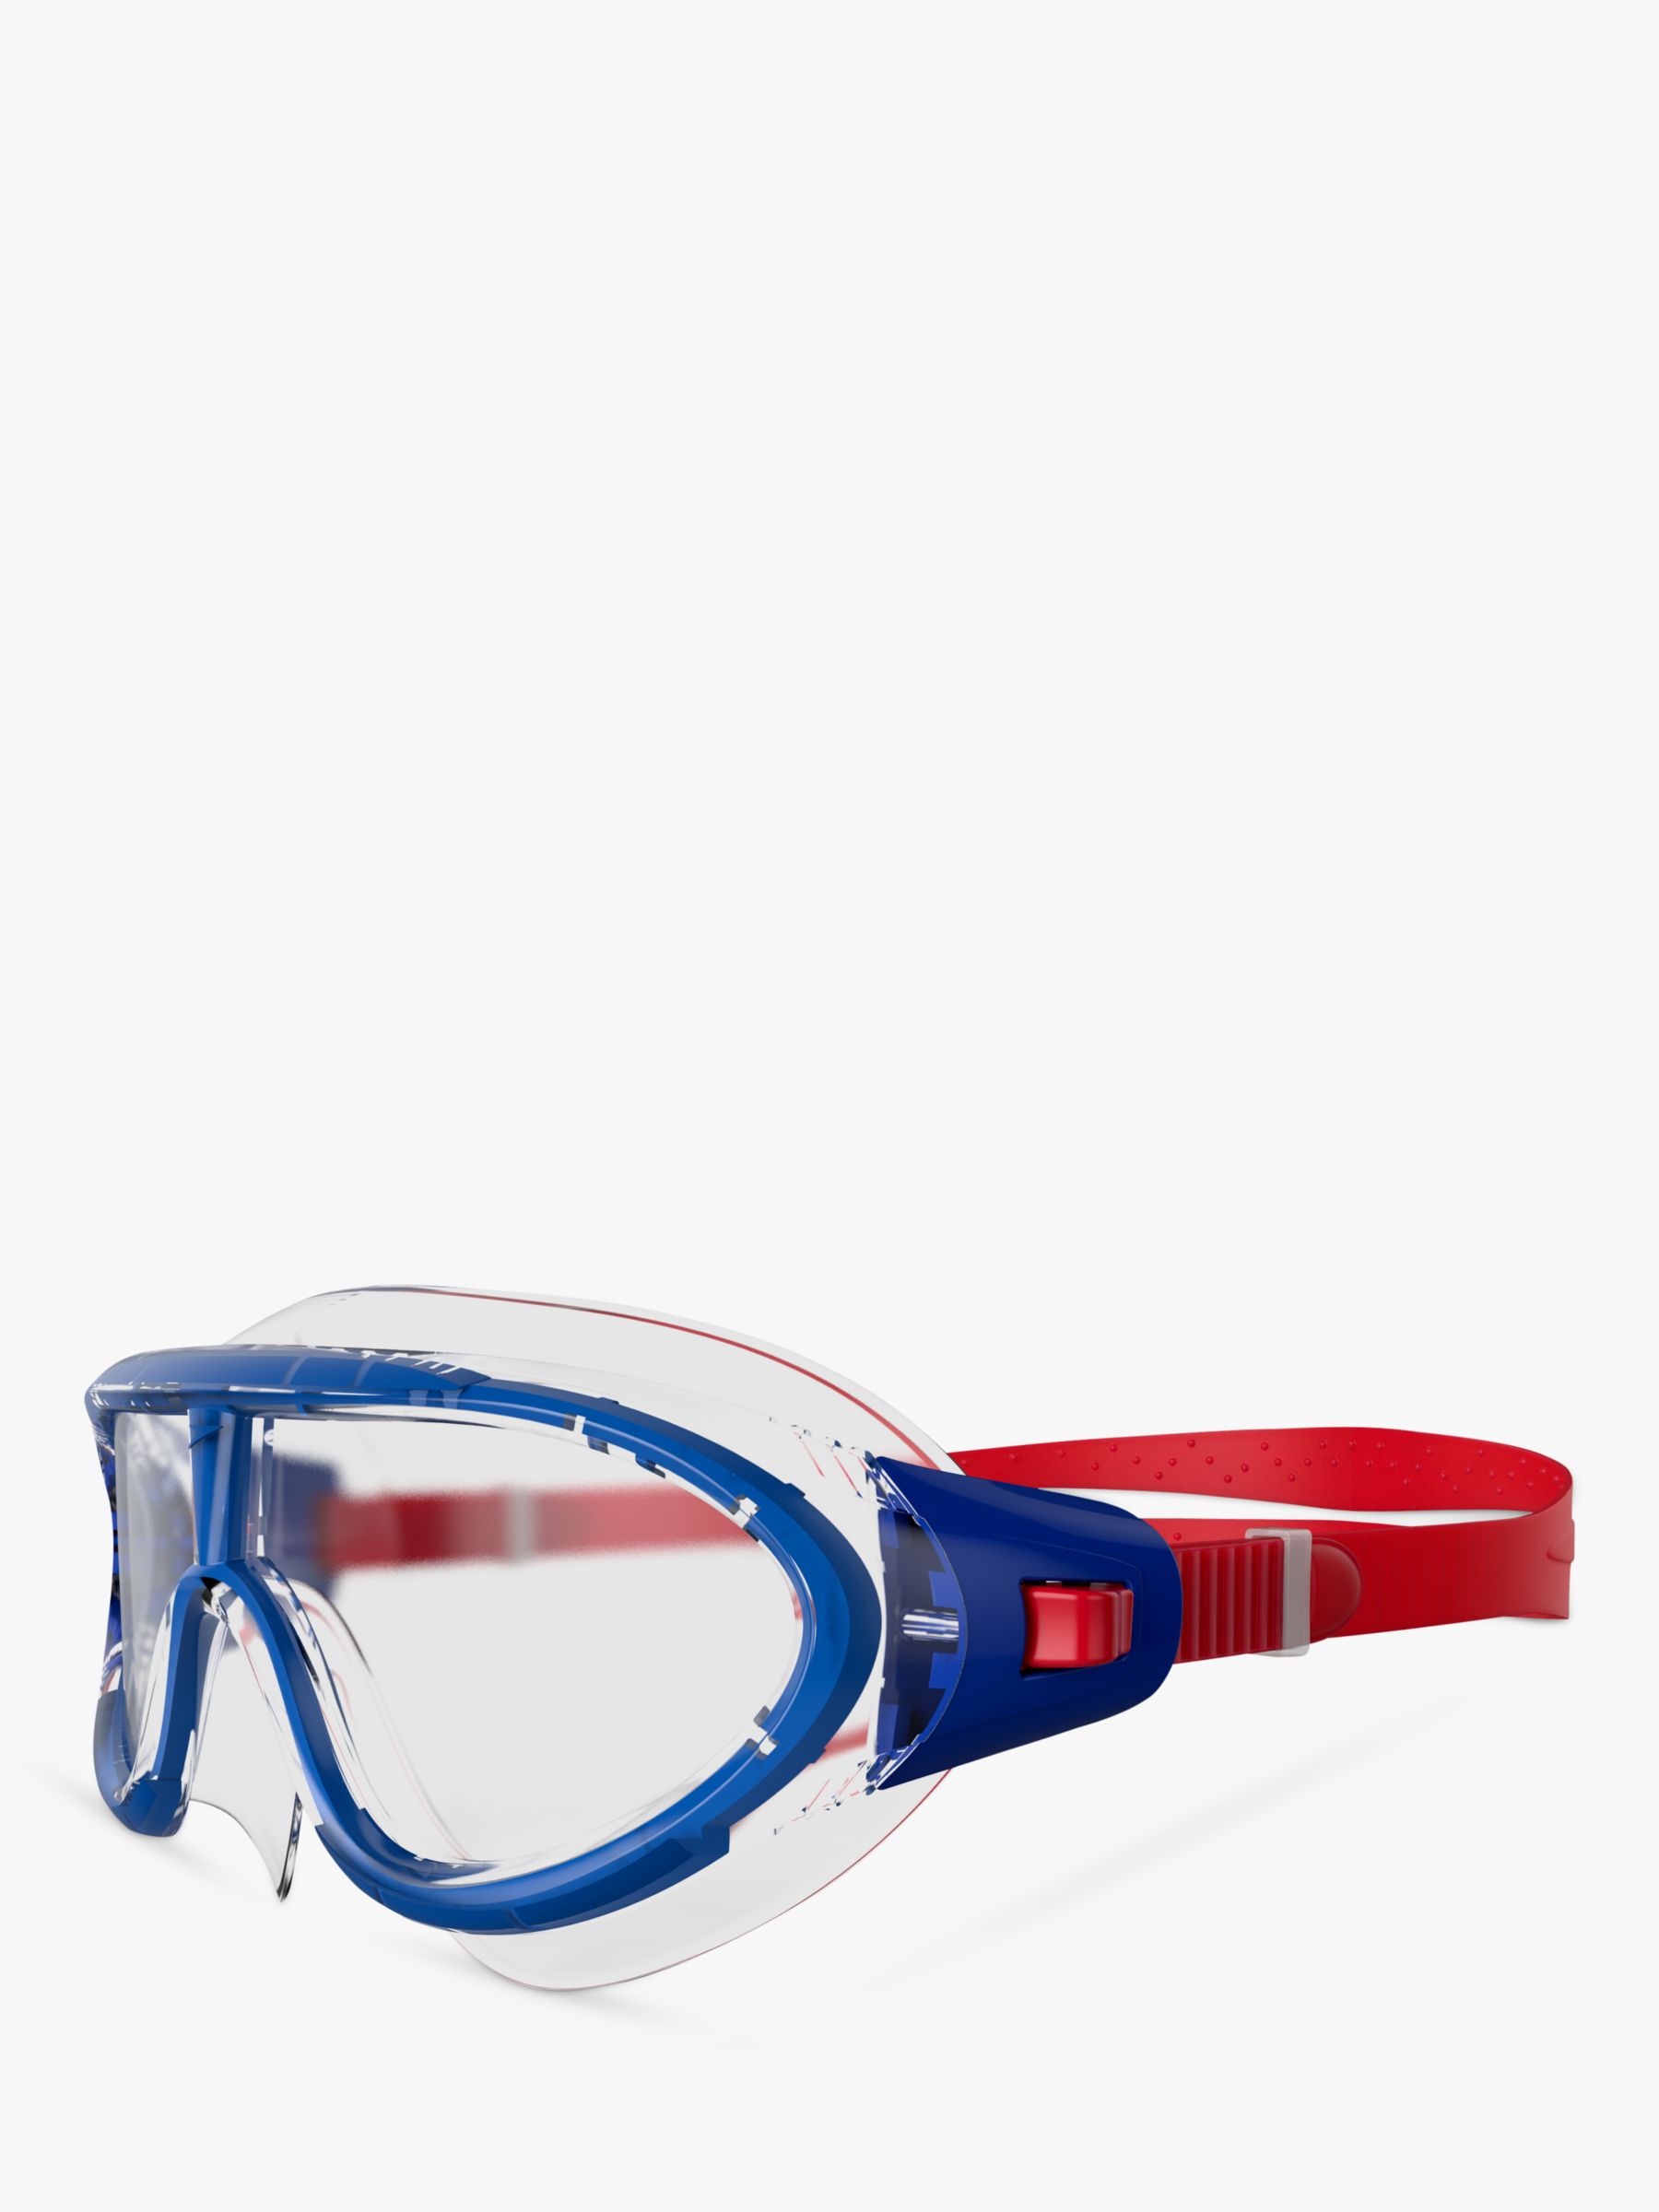 Buy Speedo Junior Rift Biofuse Swimming Mask/Goggles, Mid Red/Blue Online at johnlewis.com